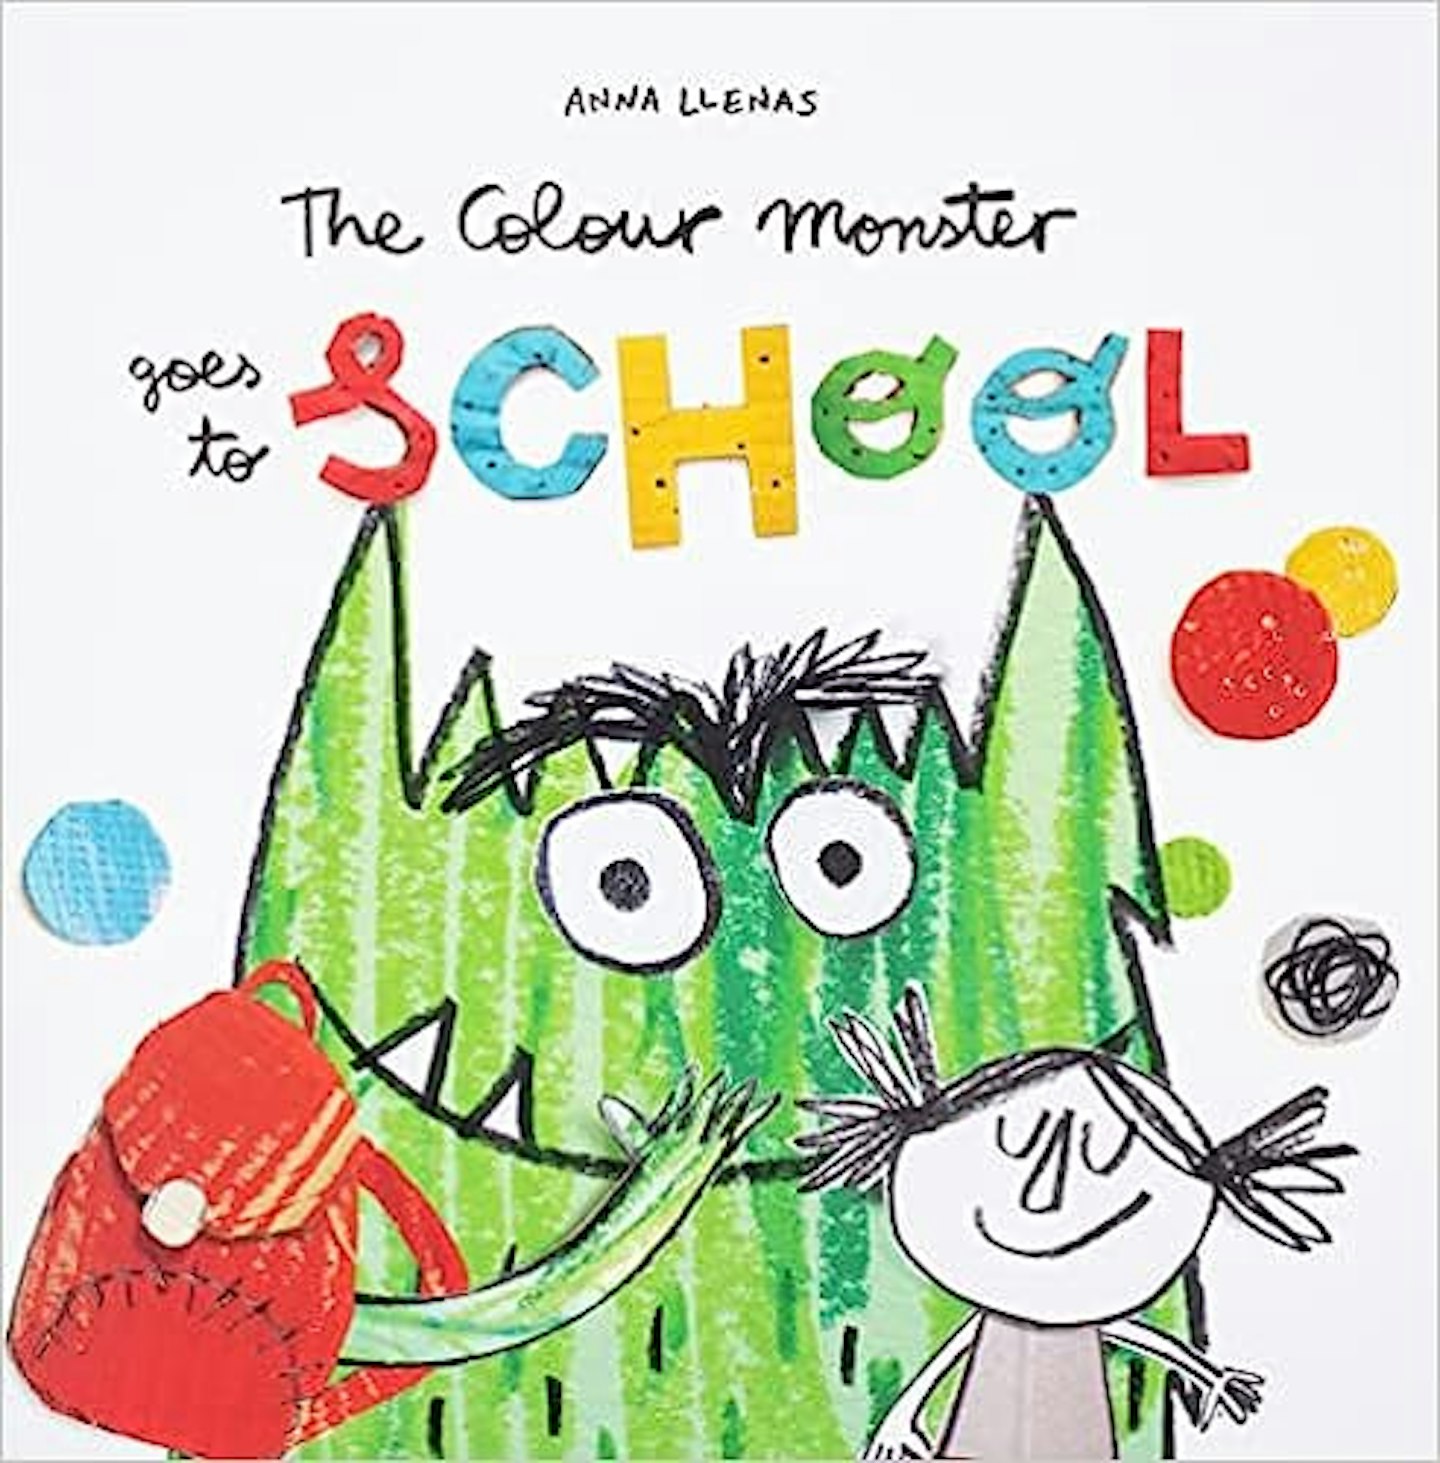 The Colour Monster Goes To School by Anna Llenas (3+, Fiction)